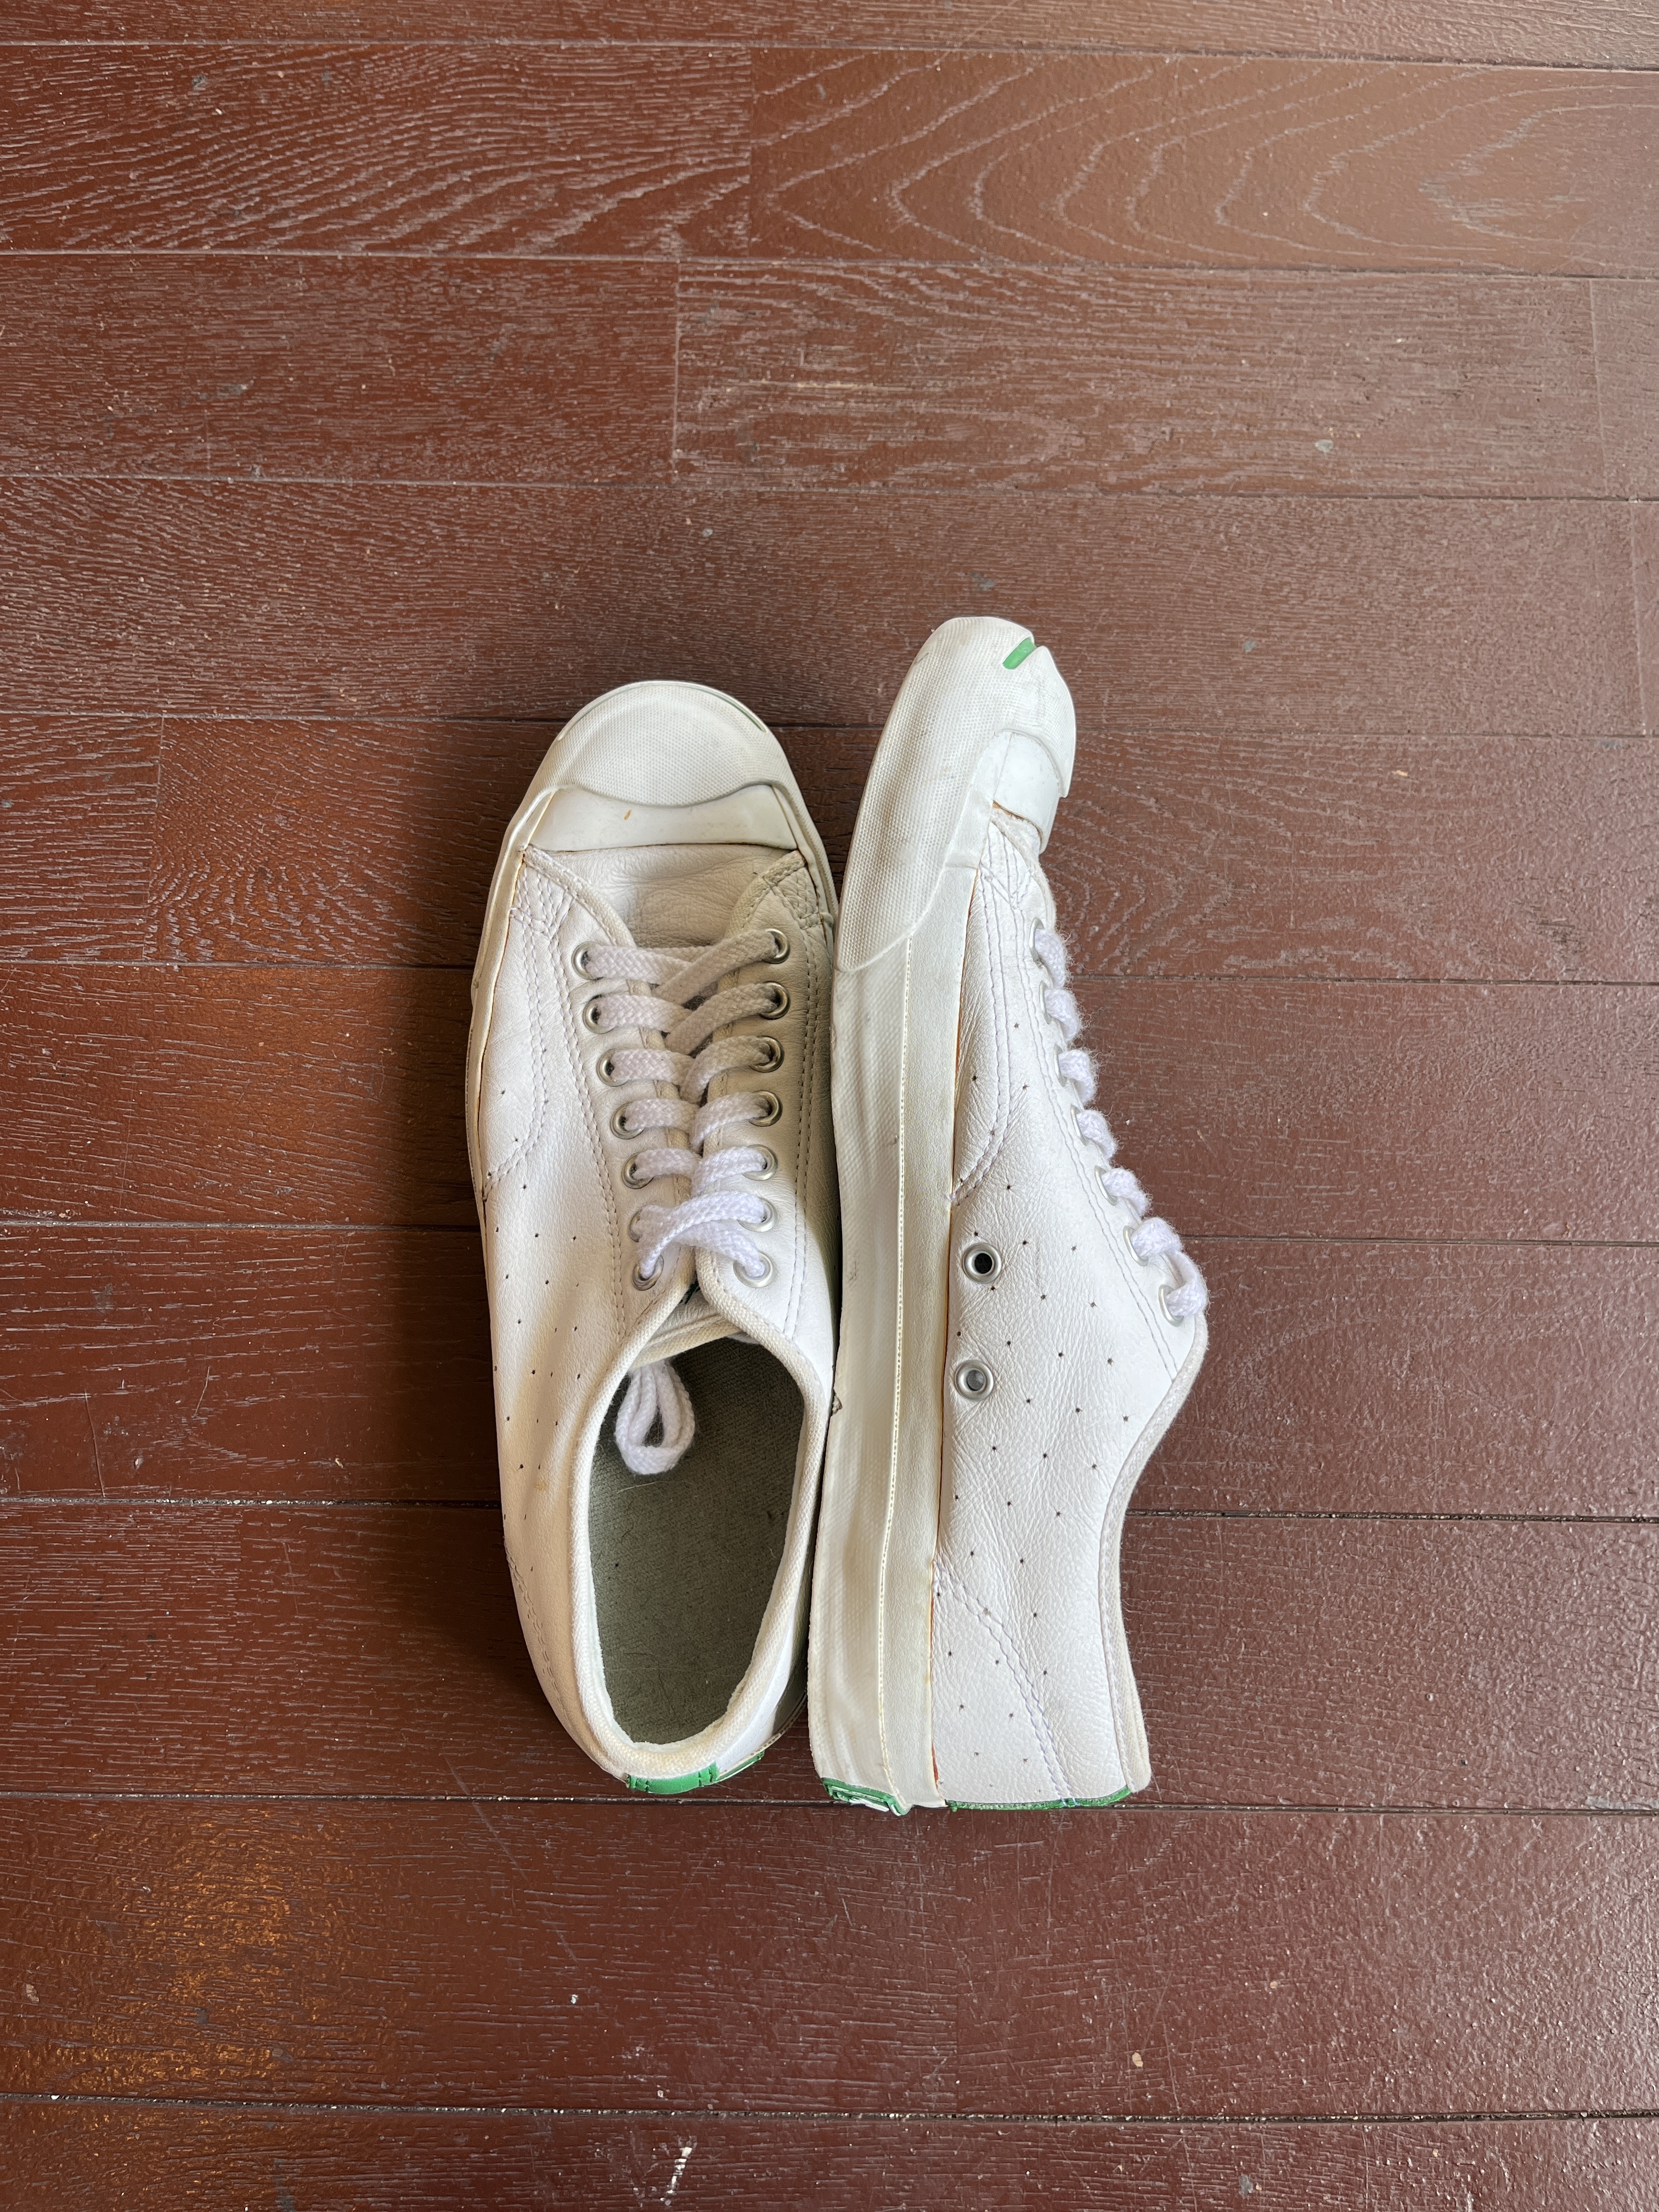 90's Punching Leather Jack Purcell Converse 27.0 US9 ジャック ...